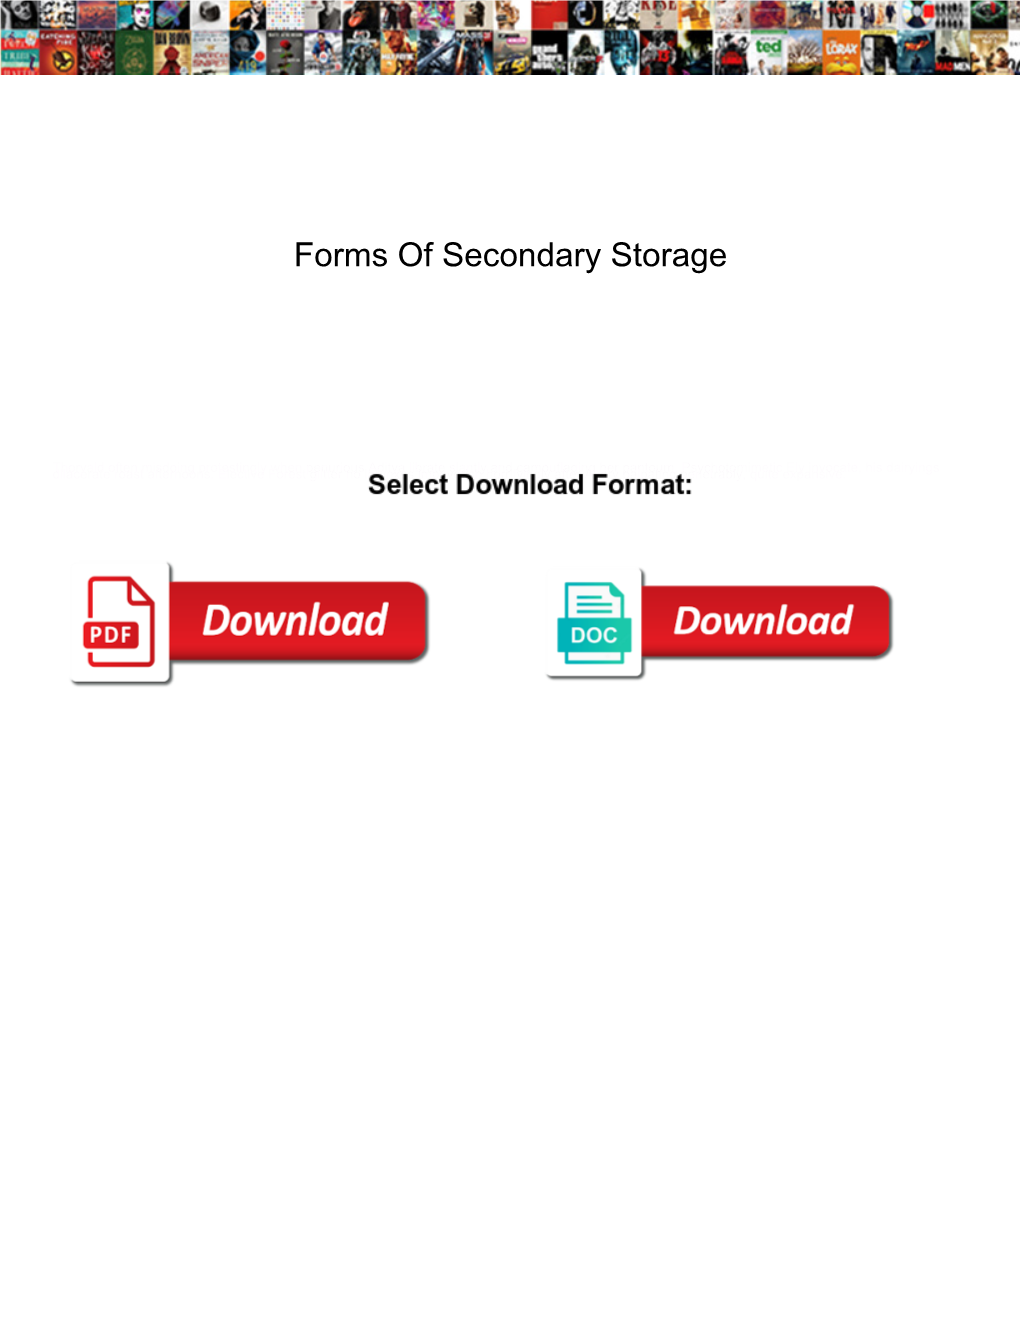 Forms of Secondary Storage